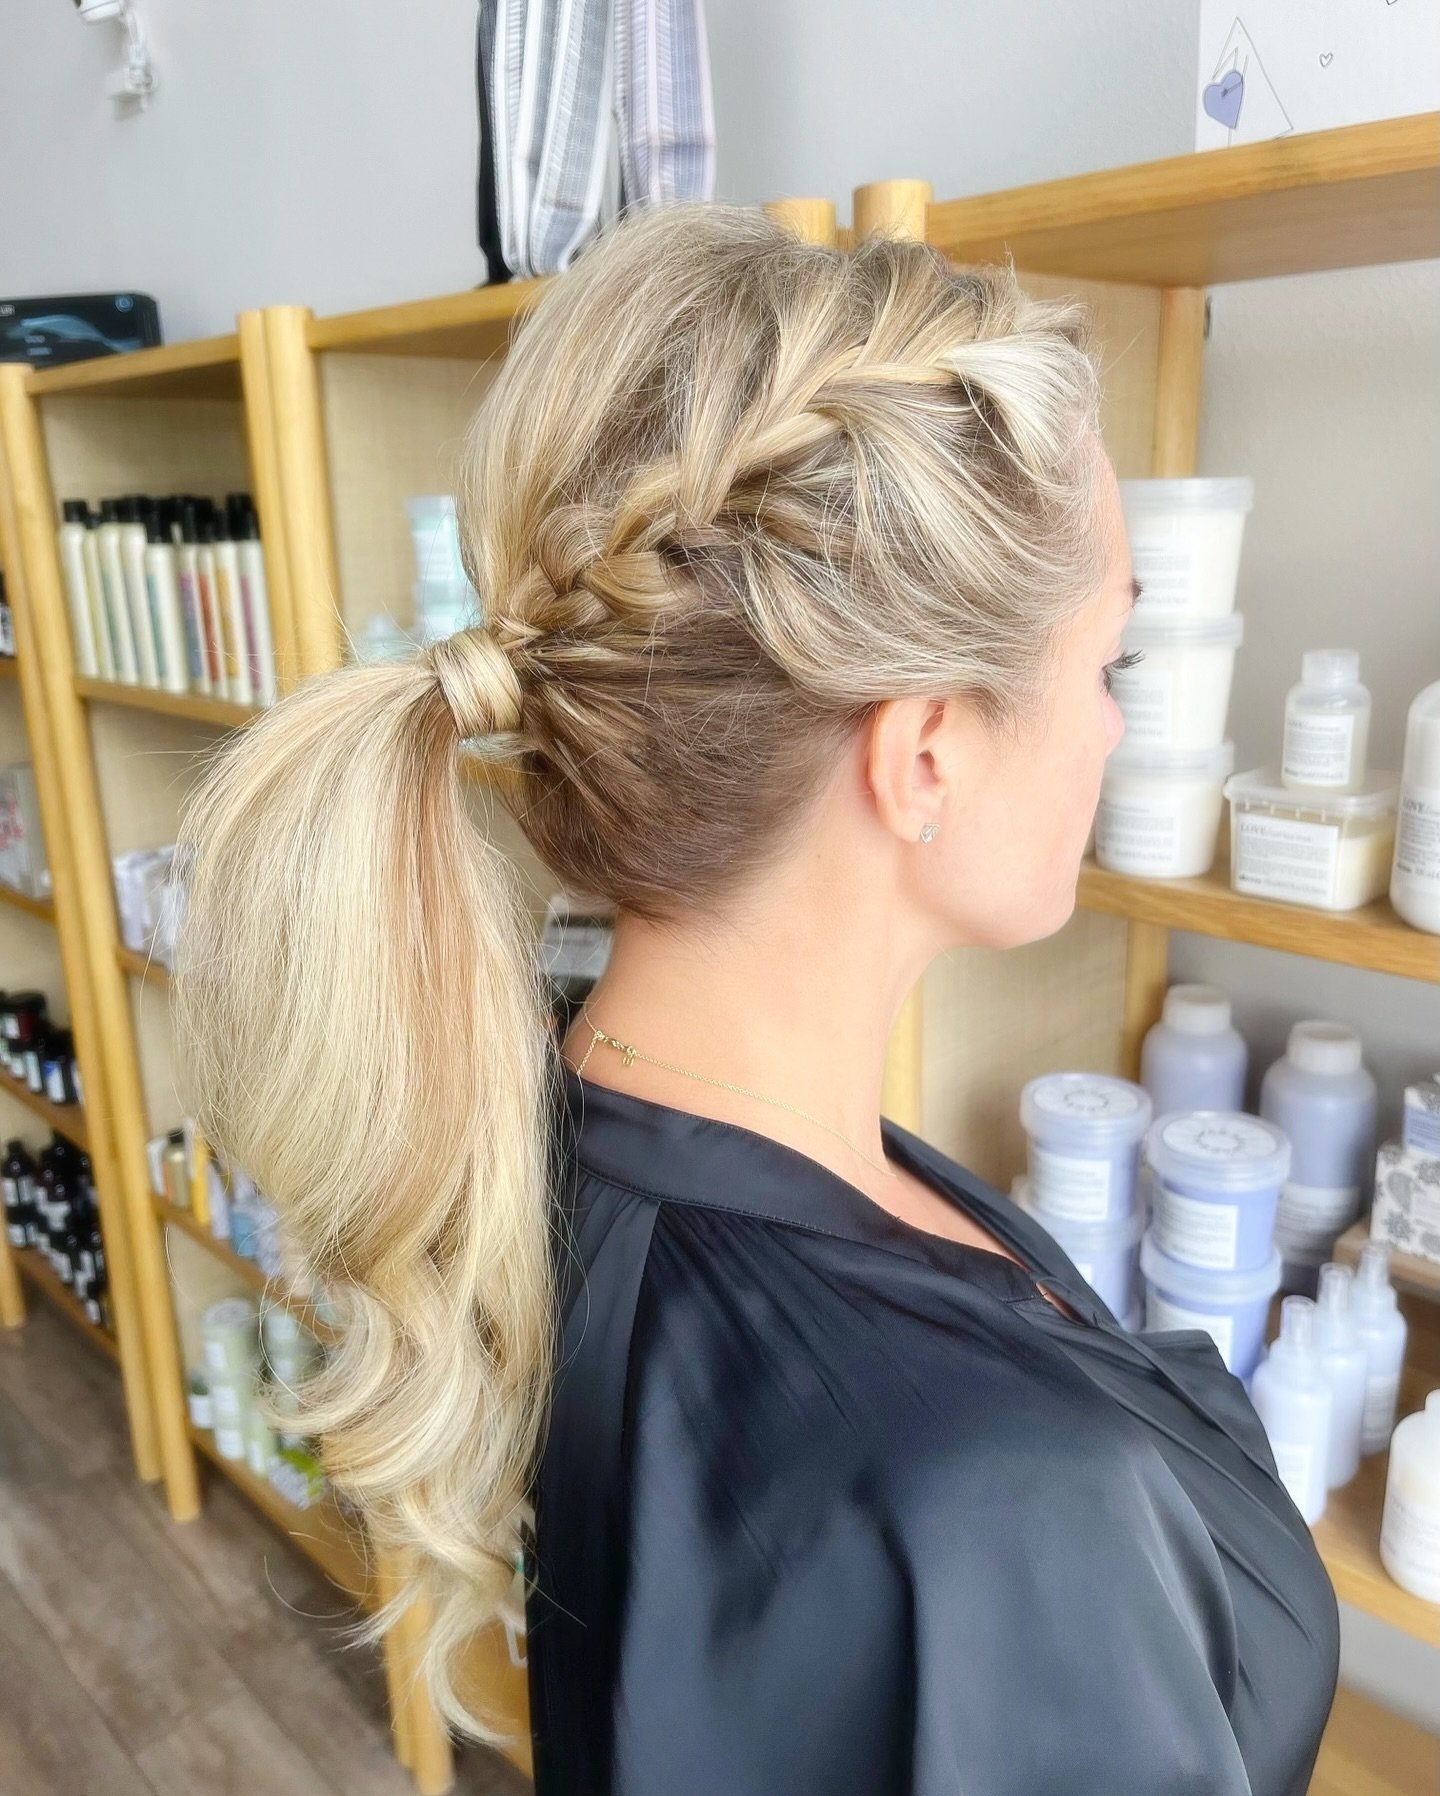 Prom, graduation, summer weddings?! You can book an appointment in the salon, or we&rsquo;ll come to you! 

Hair by @mads.hair_ 

#littlerockhairstylist #littlerocksalon #littlerockweddinghair